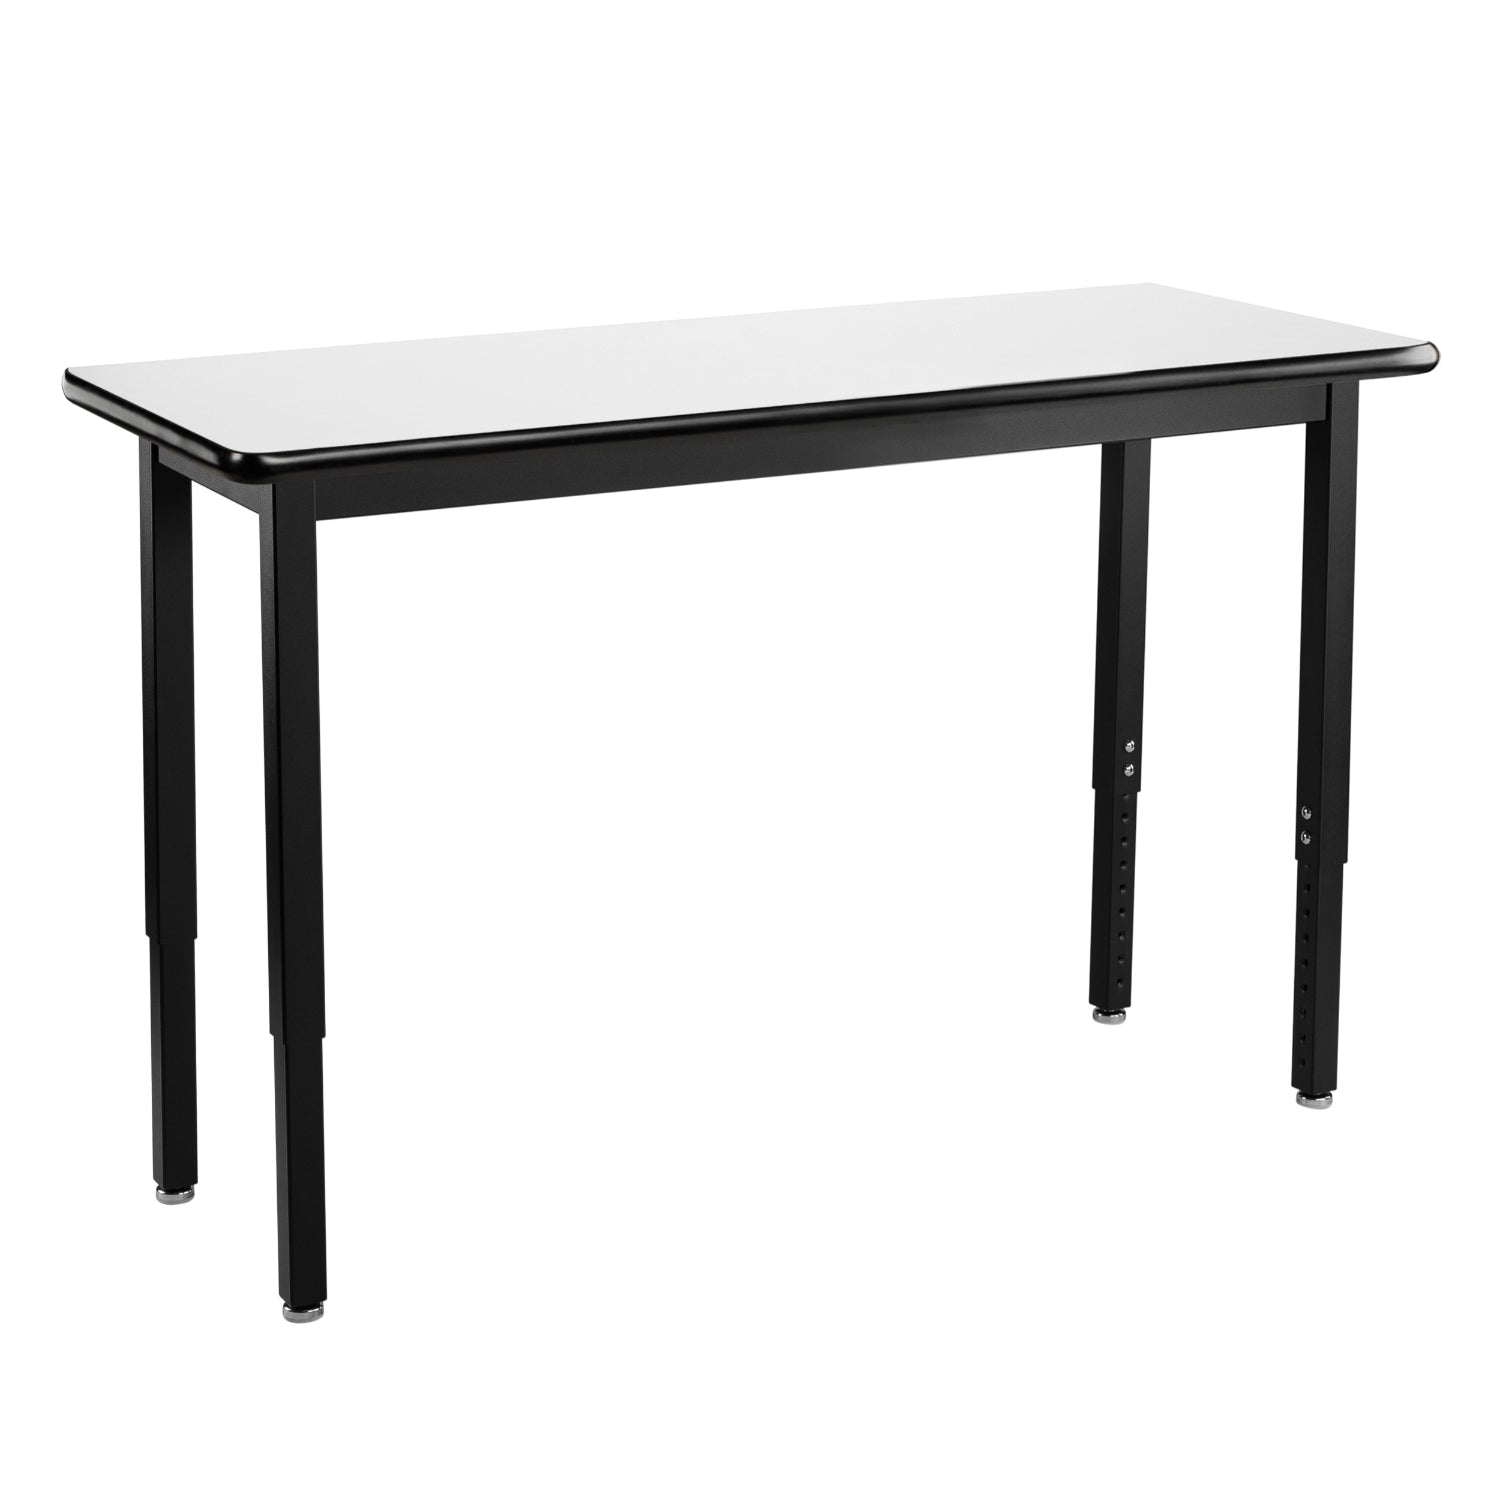 Heavy-Duty Height-Adjustable Utility Table, Black Frame, 18" x 48", Whiteboard High-Pressure Laminate Top